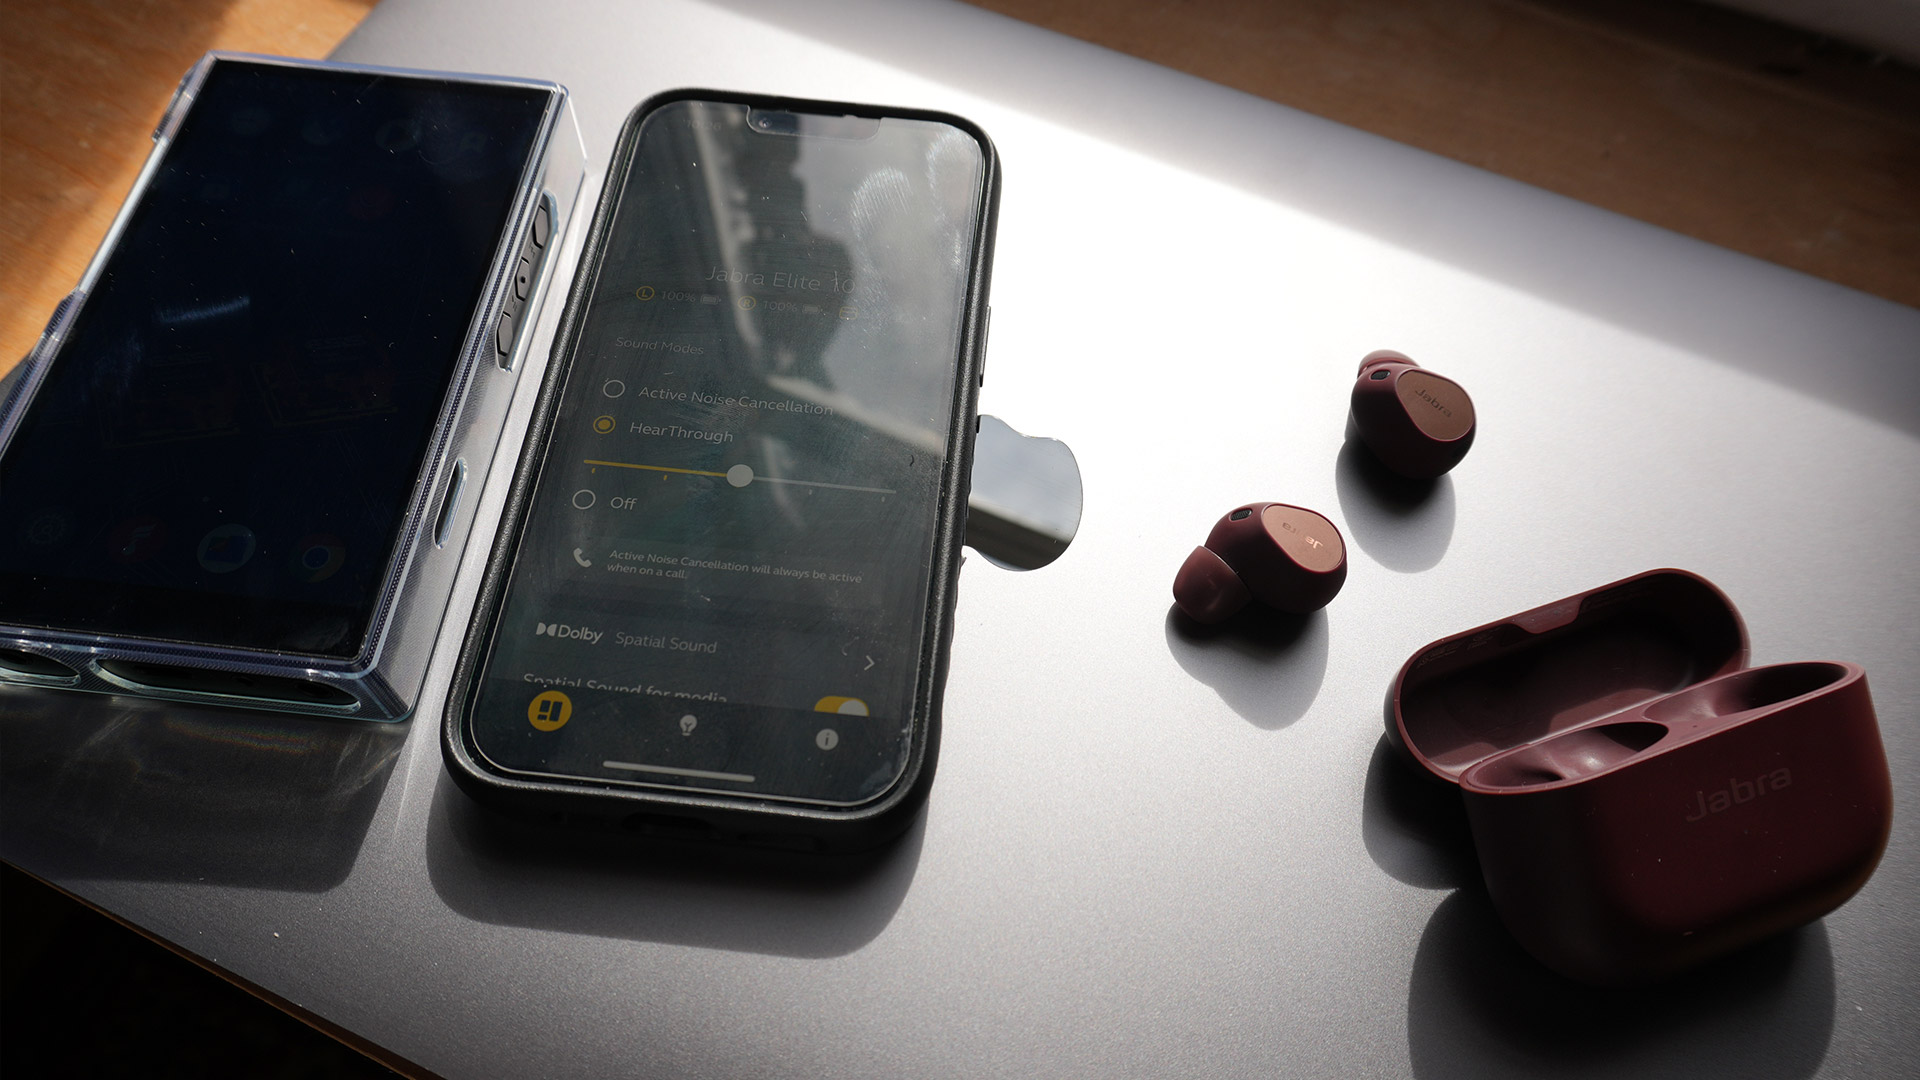 The Jabra Elite 10s on a Mac next to an iPhone and DAP